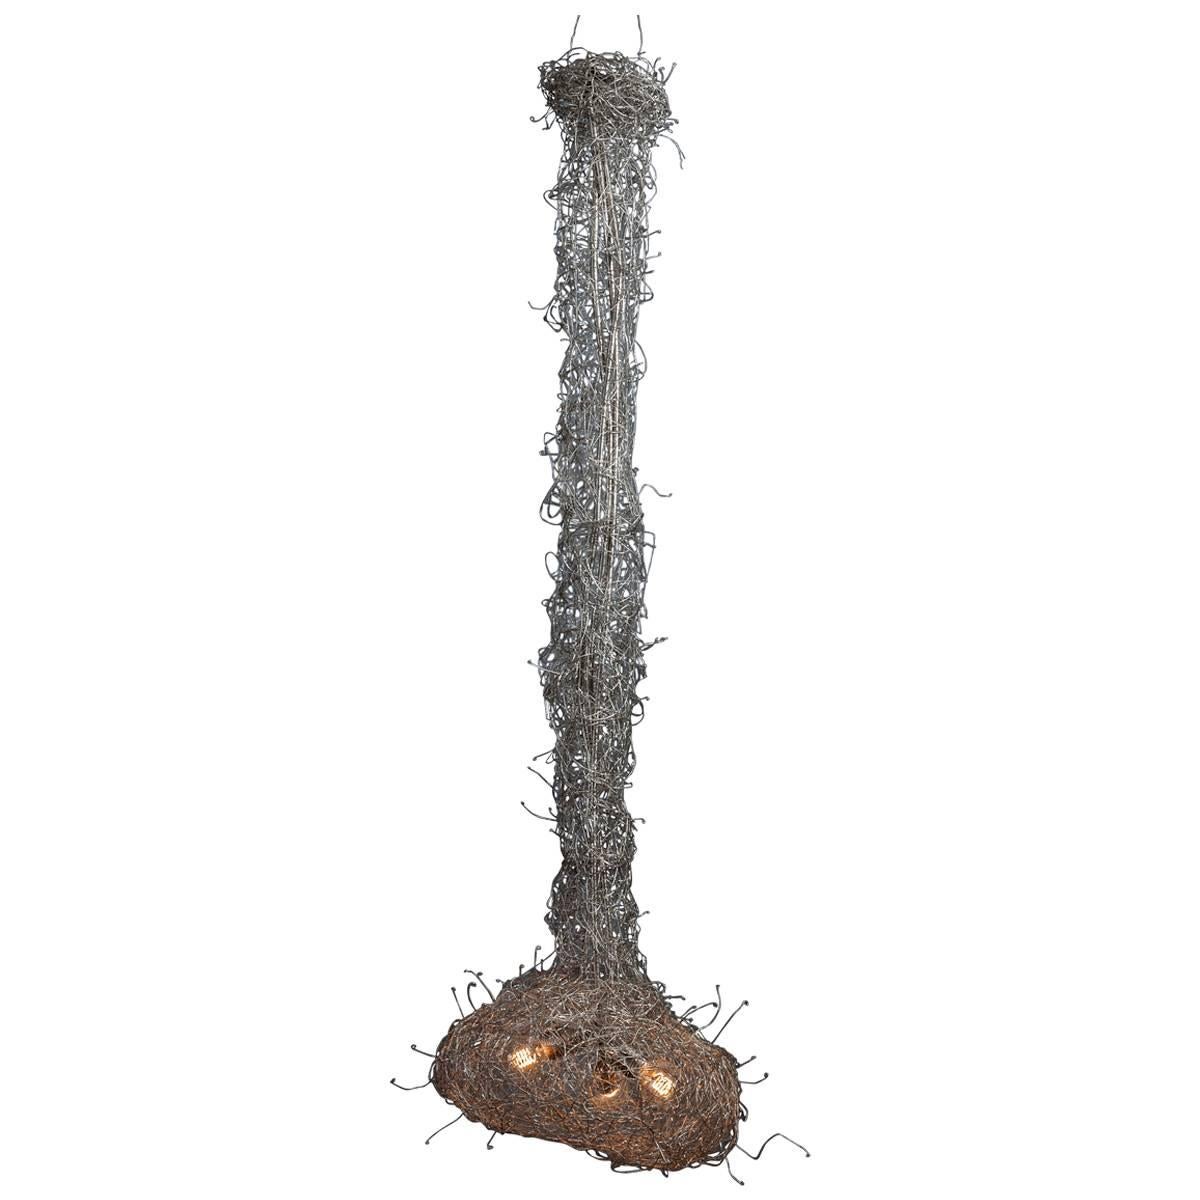 Shortlisted in The Design et al International Product Design Awards, 2016.
Handwoven hammered stainless steel decorative ceiling lamp.
The “spun” stainless steel design is reminiscent of a Cocoon and gives off a soft light that is enhanced by the